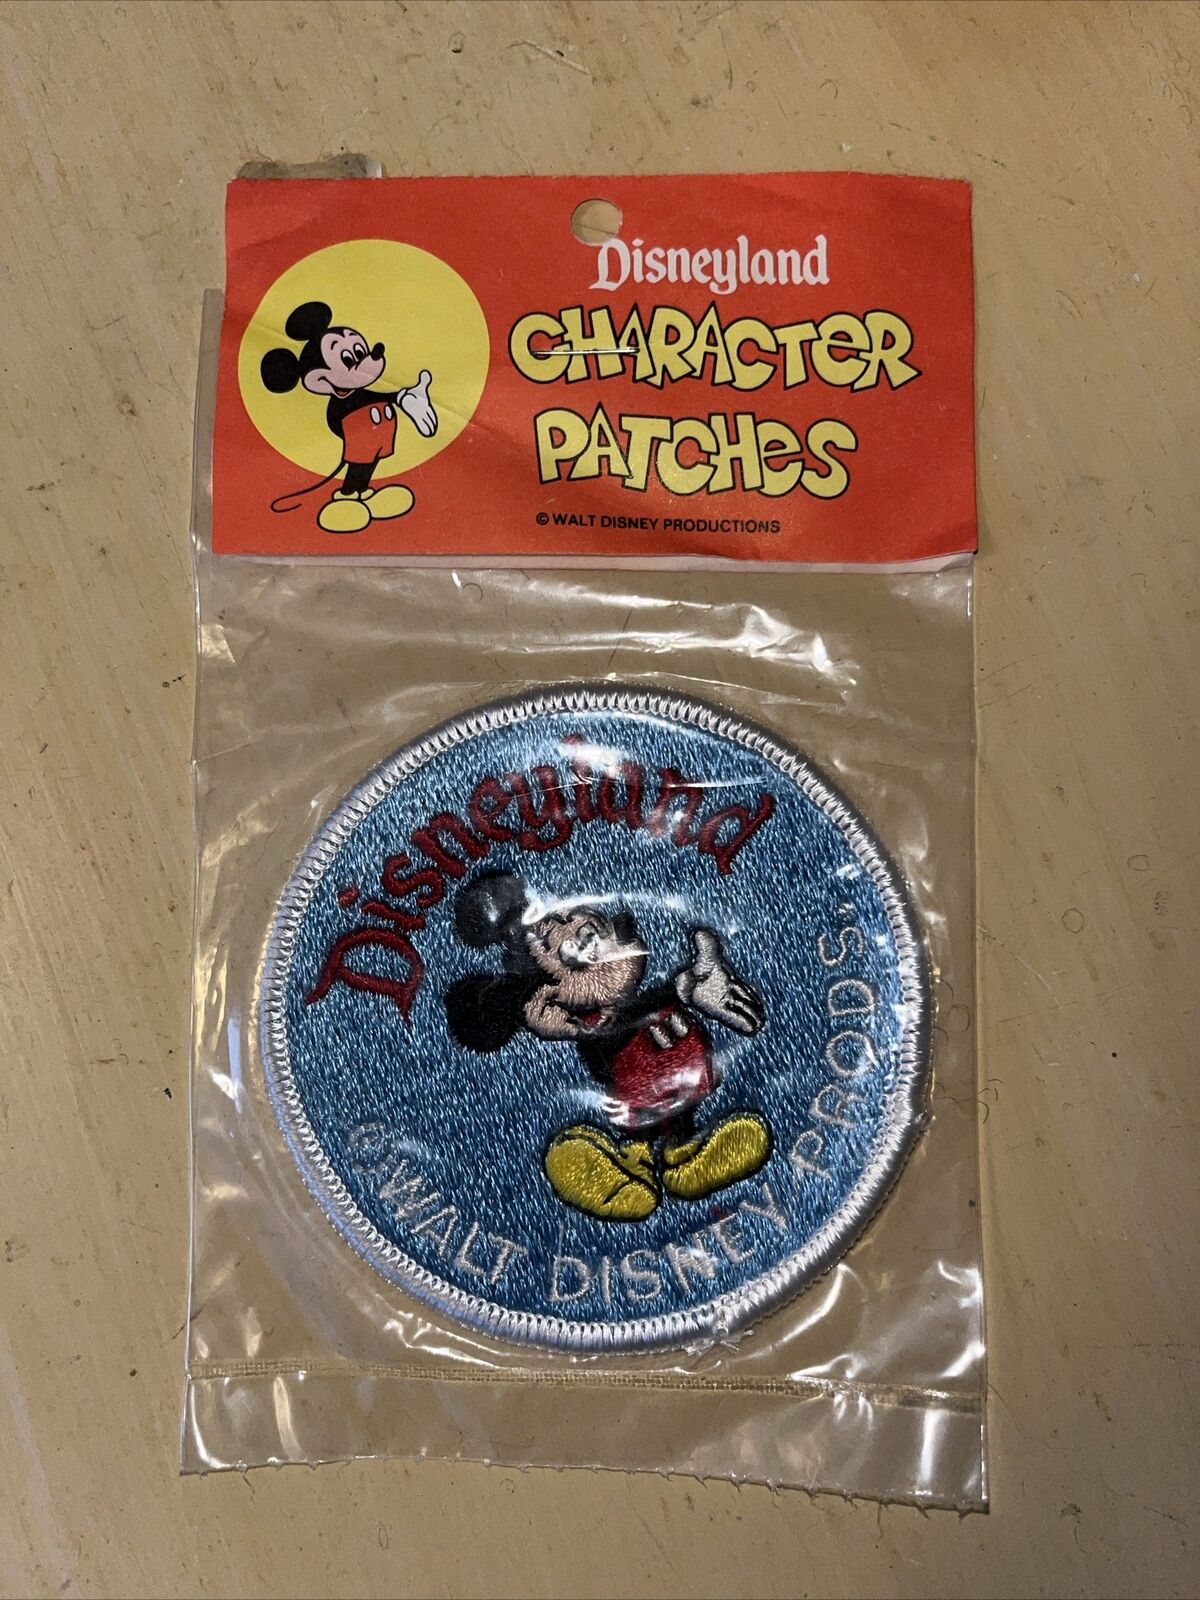 VINTAGE Disneyland Walt Disney Prods. Character Patches Blue Mickey Mouse 1970\'s